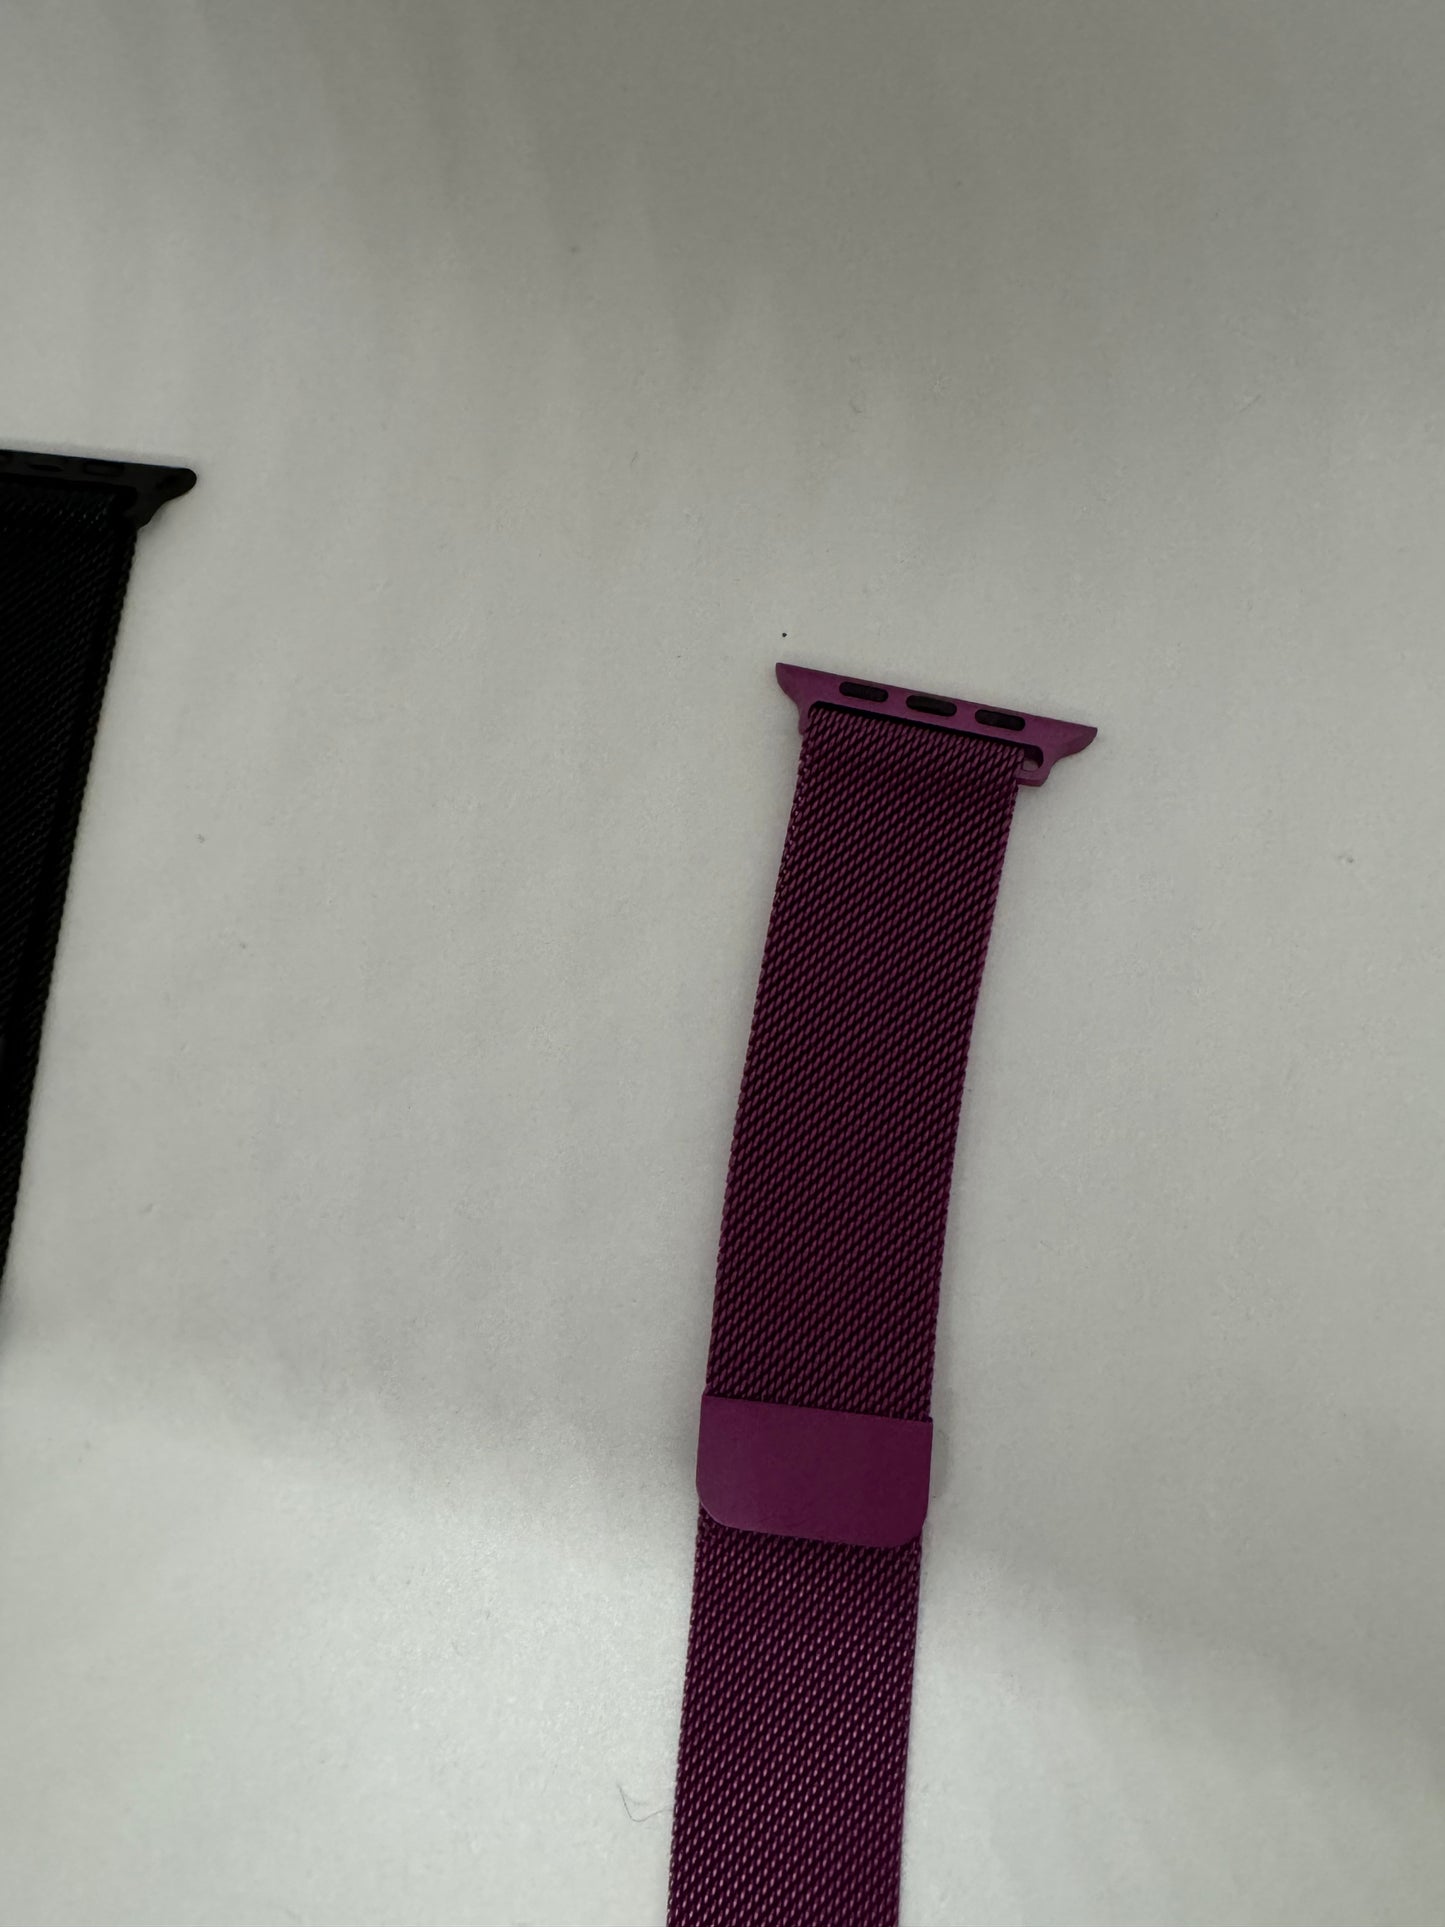 The picture shows two watch bands lying on a white surface. The one on the left is partially visible and appears to be black. The one on the right is more visible and is a vibrant purple color. The purple watch band has a textured pattern and a metal attachment with three holes at the top, which is likely used to connect it to a watch.